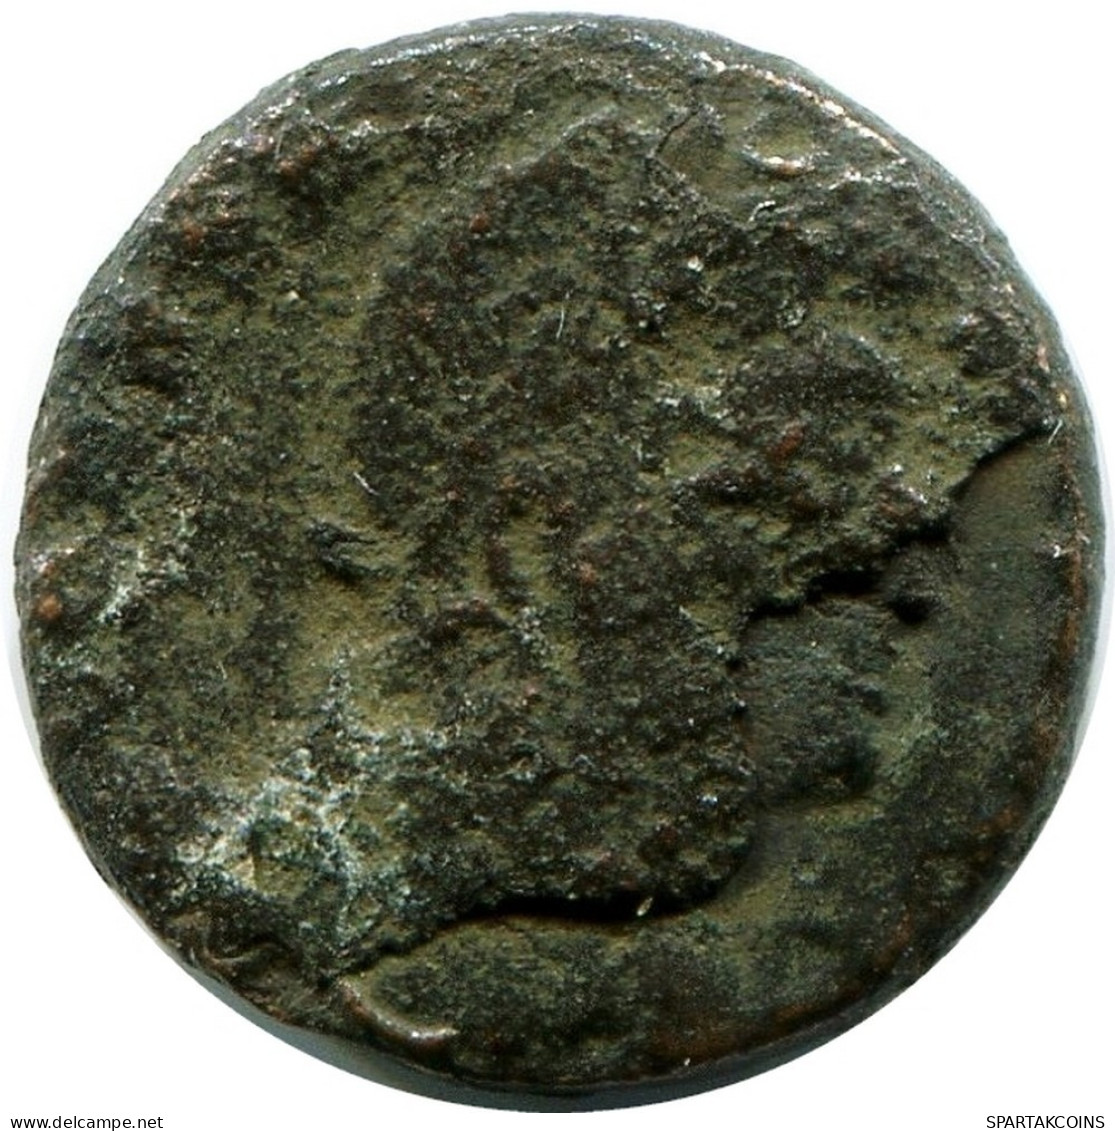 ROMAN Coin MINTED IN ANTIOCH FROM THE ROYAL ONTARIO MUSEUM #ANC11285.14.U.A - El Imperio Christiano (307 / 363)